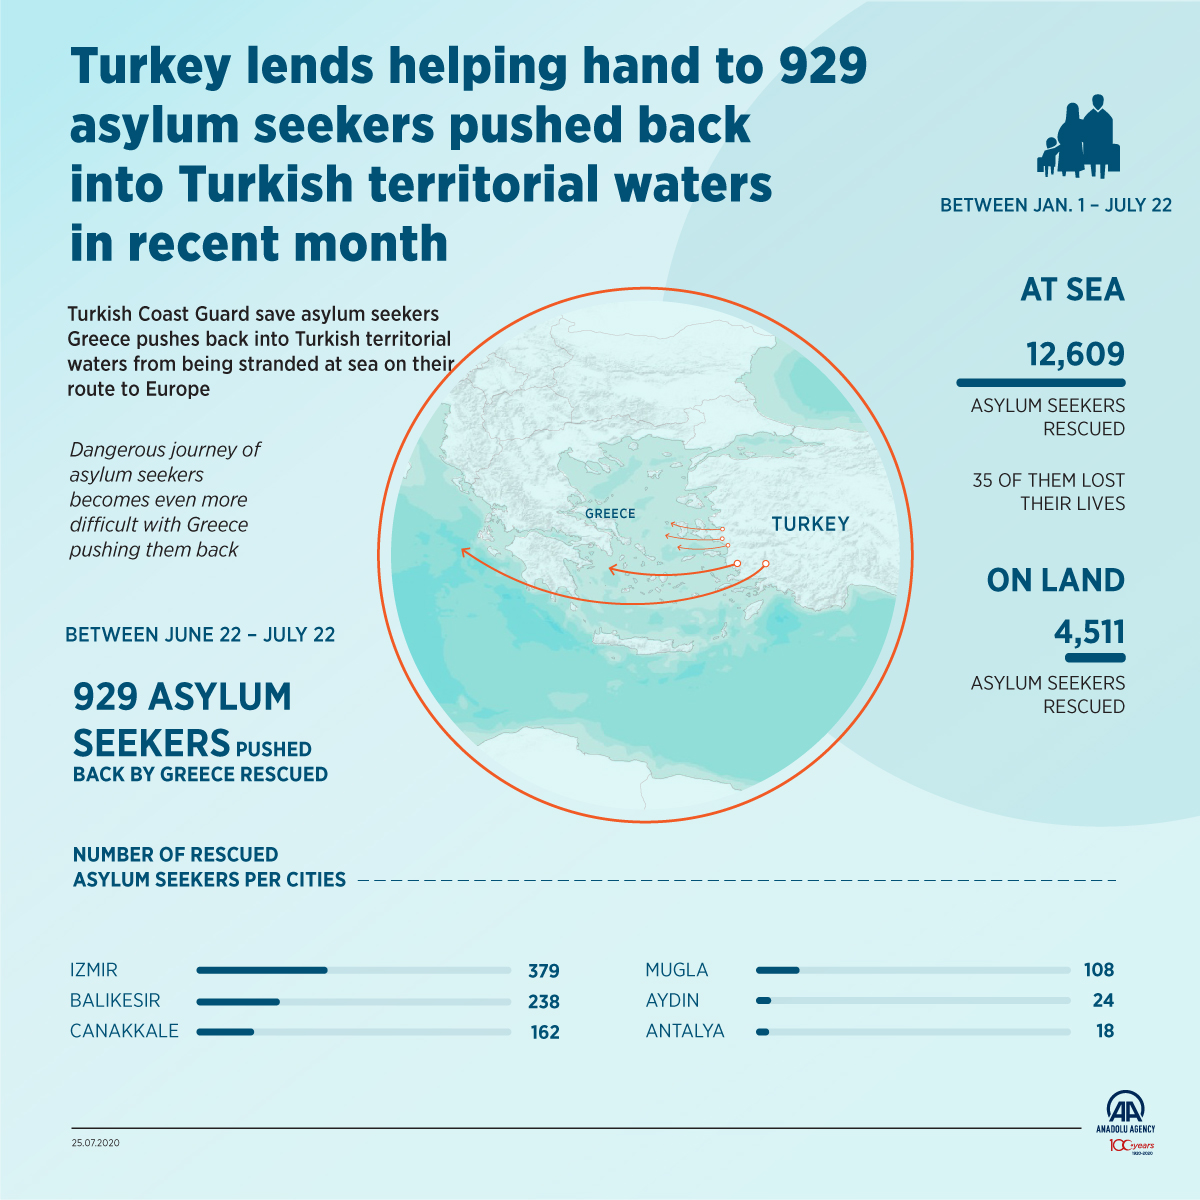 Turkey lends helping hand to 929 asylum seekers pushed back into Turkish territorial waters in recent month